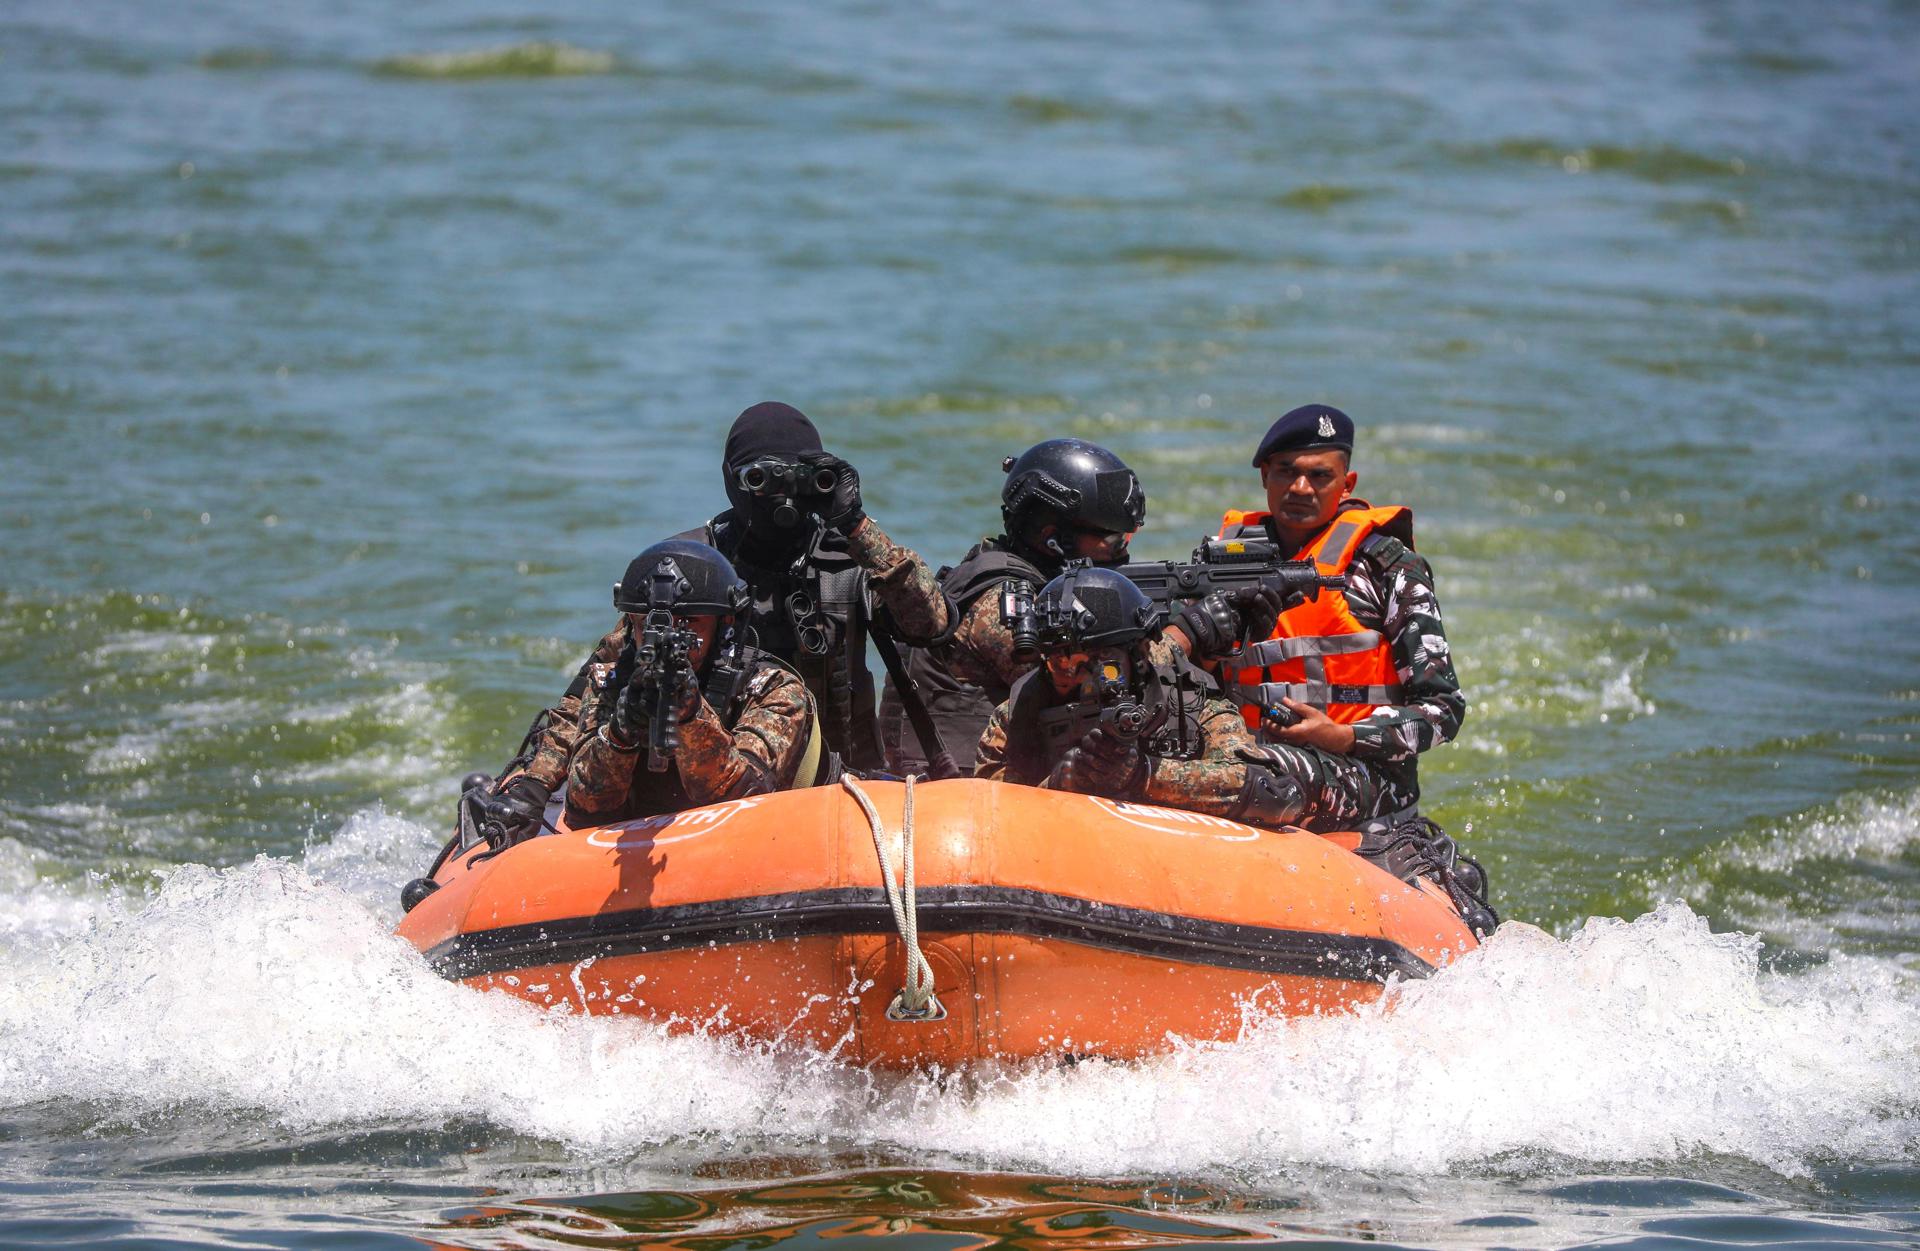 Indian paramilitary Central Reserve Police Force's (CRPF) Quick Action Team conduct a security drill on the waters of Dal Lake ahead of the G20 meeting in Srinagar, the summer capital of Indian Kashmir, 20 May 2023. EFE-EPA/FILE/FAROOQ KHAN